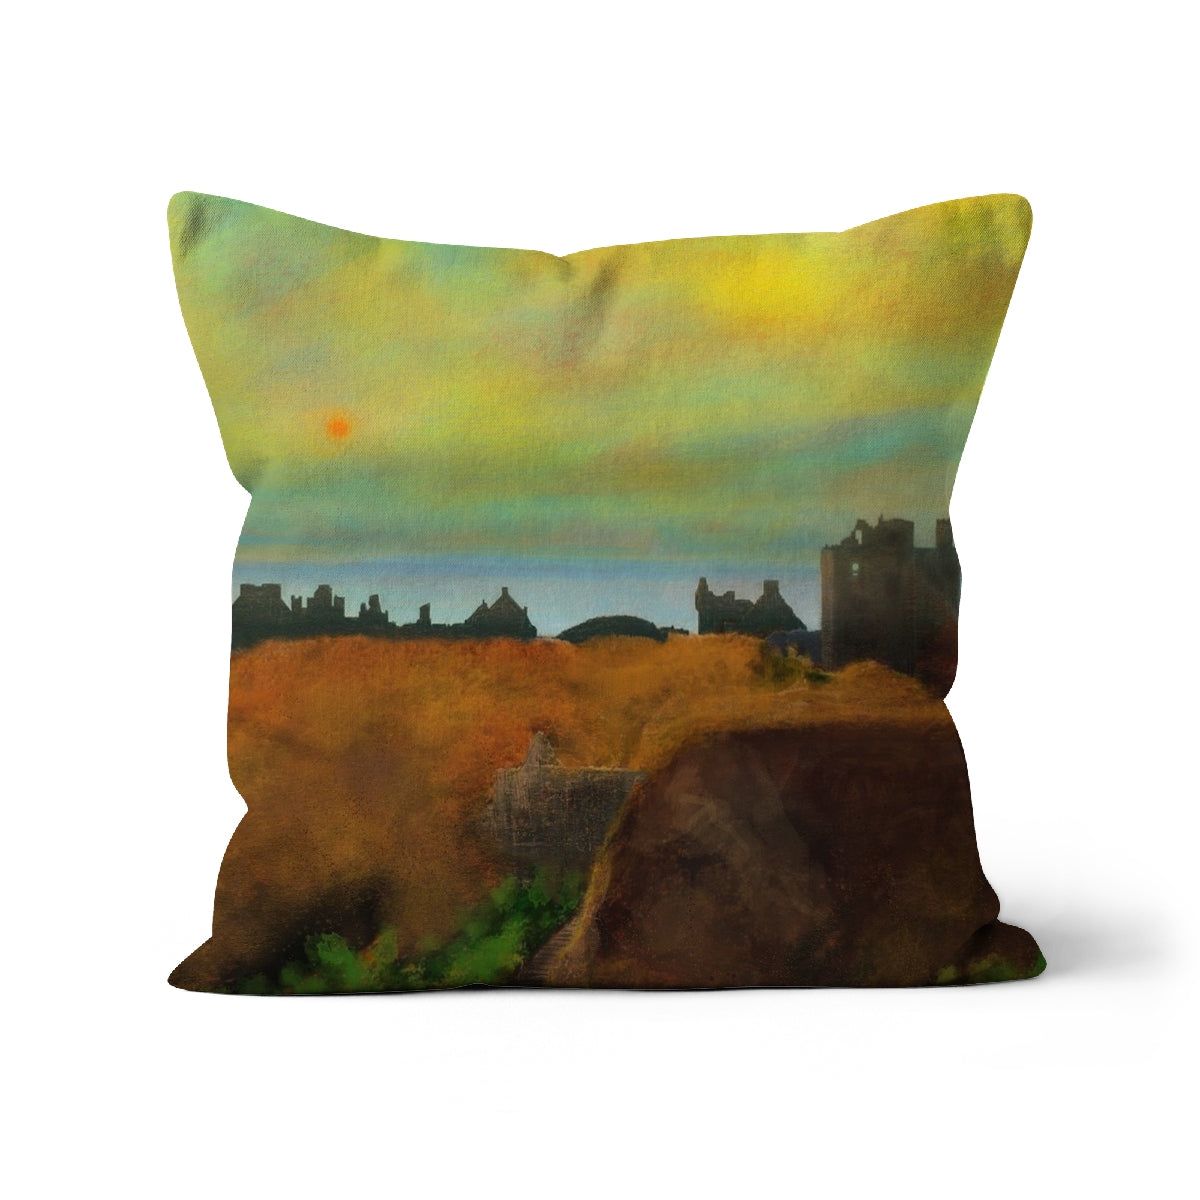 Dunnottar Castle Art Gifts Cushion-Cushions-Historic & Iconic Scotland Art Gallery-Faux Suede-12"x12"-Paintings, Prints, Homeware, Art Gifts From Scotland By Scottish Artist Kevin Hunter